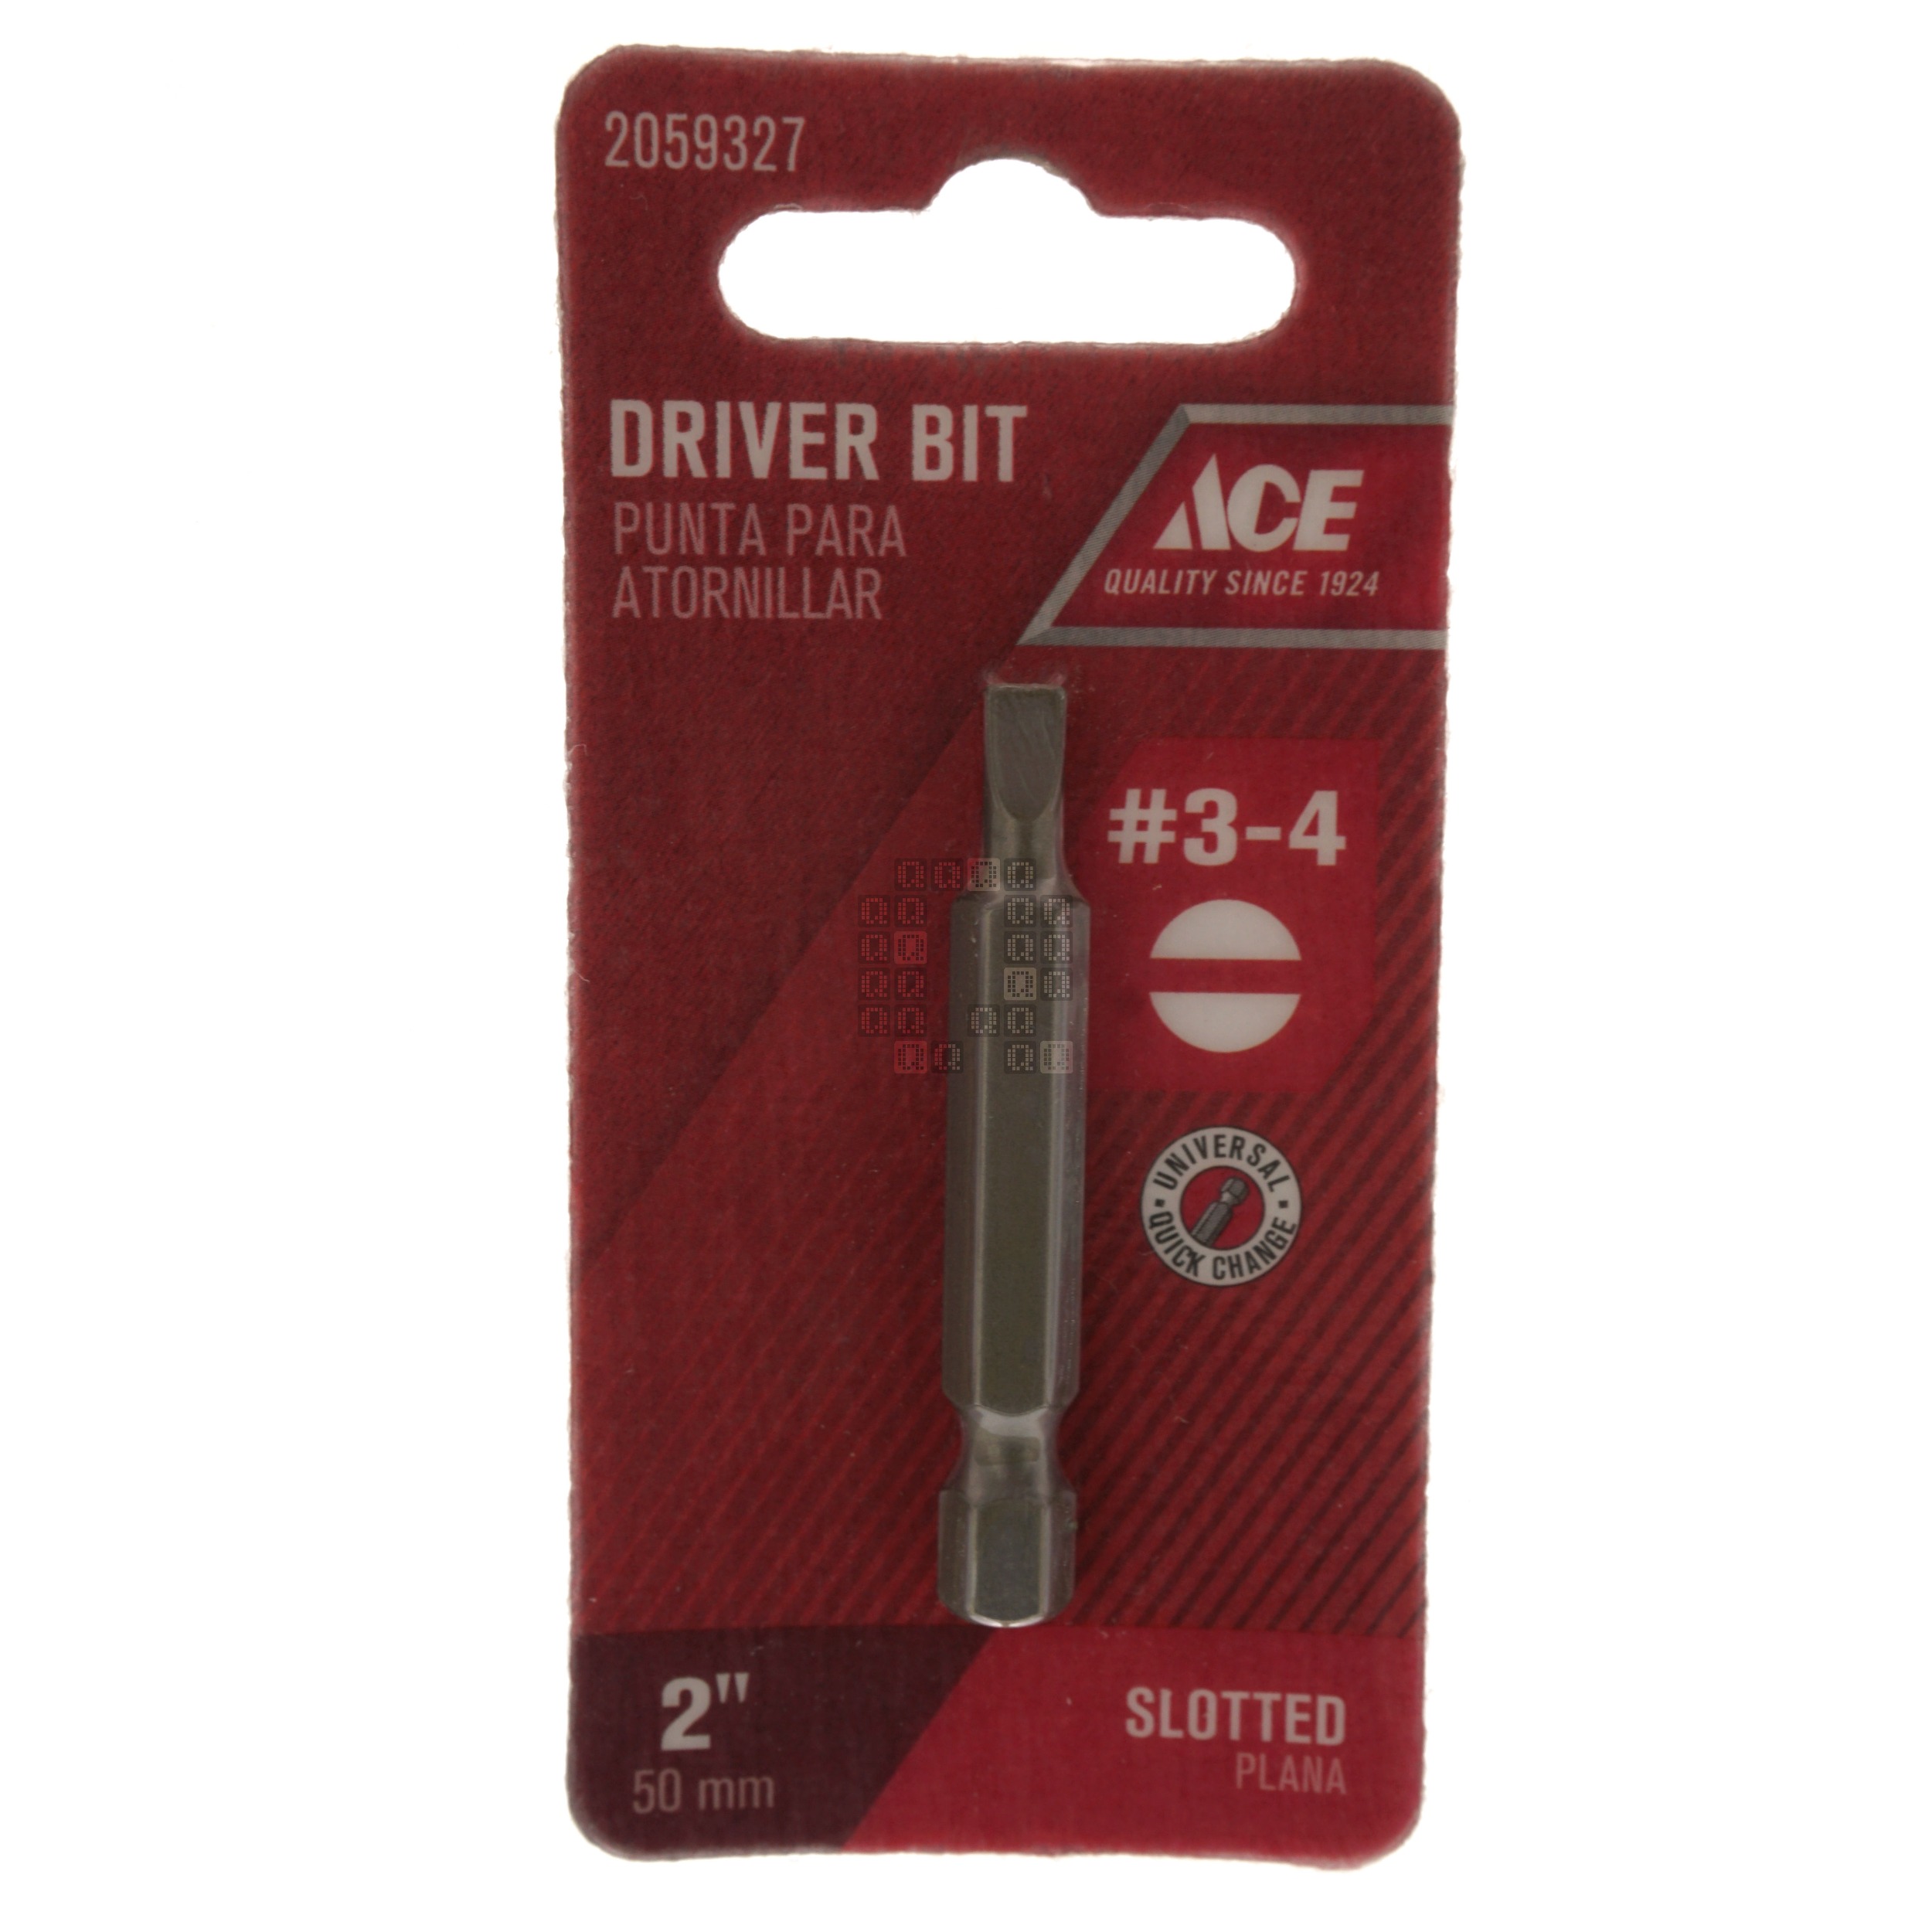 ACE Hardware 2059327 #3-4 Slotted Driver Bit, 2" Length, 1/4" Hex Drive